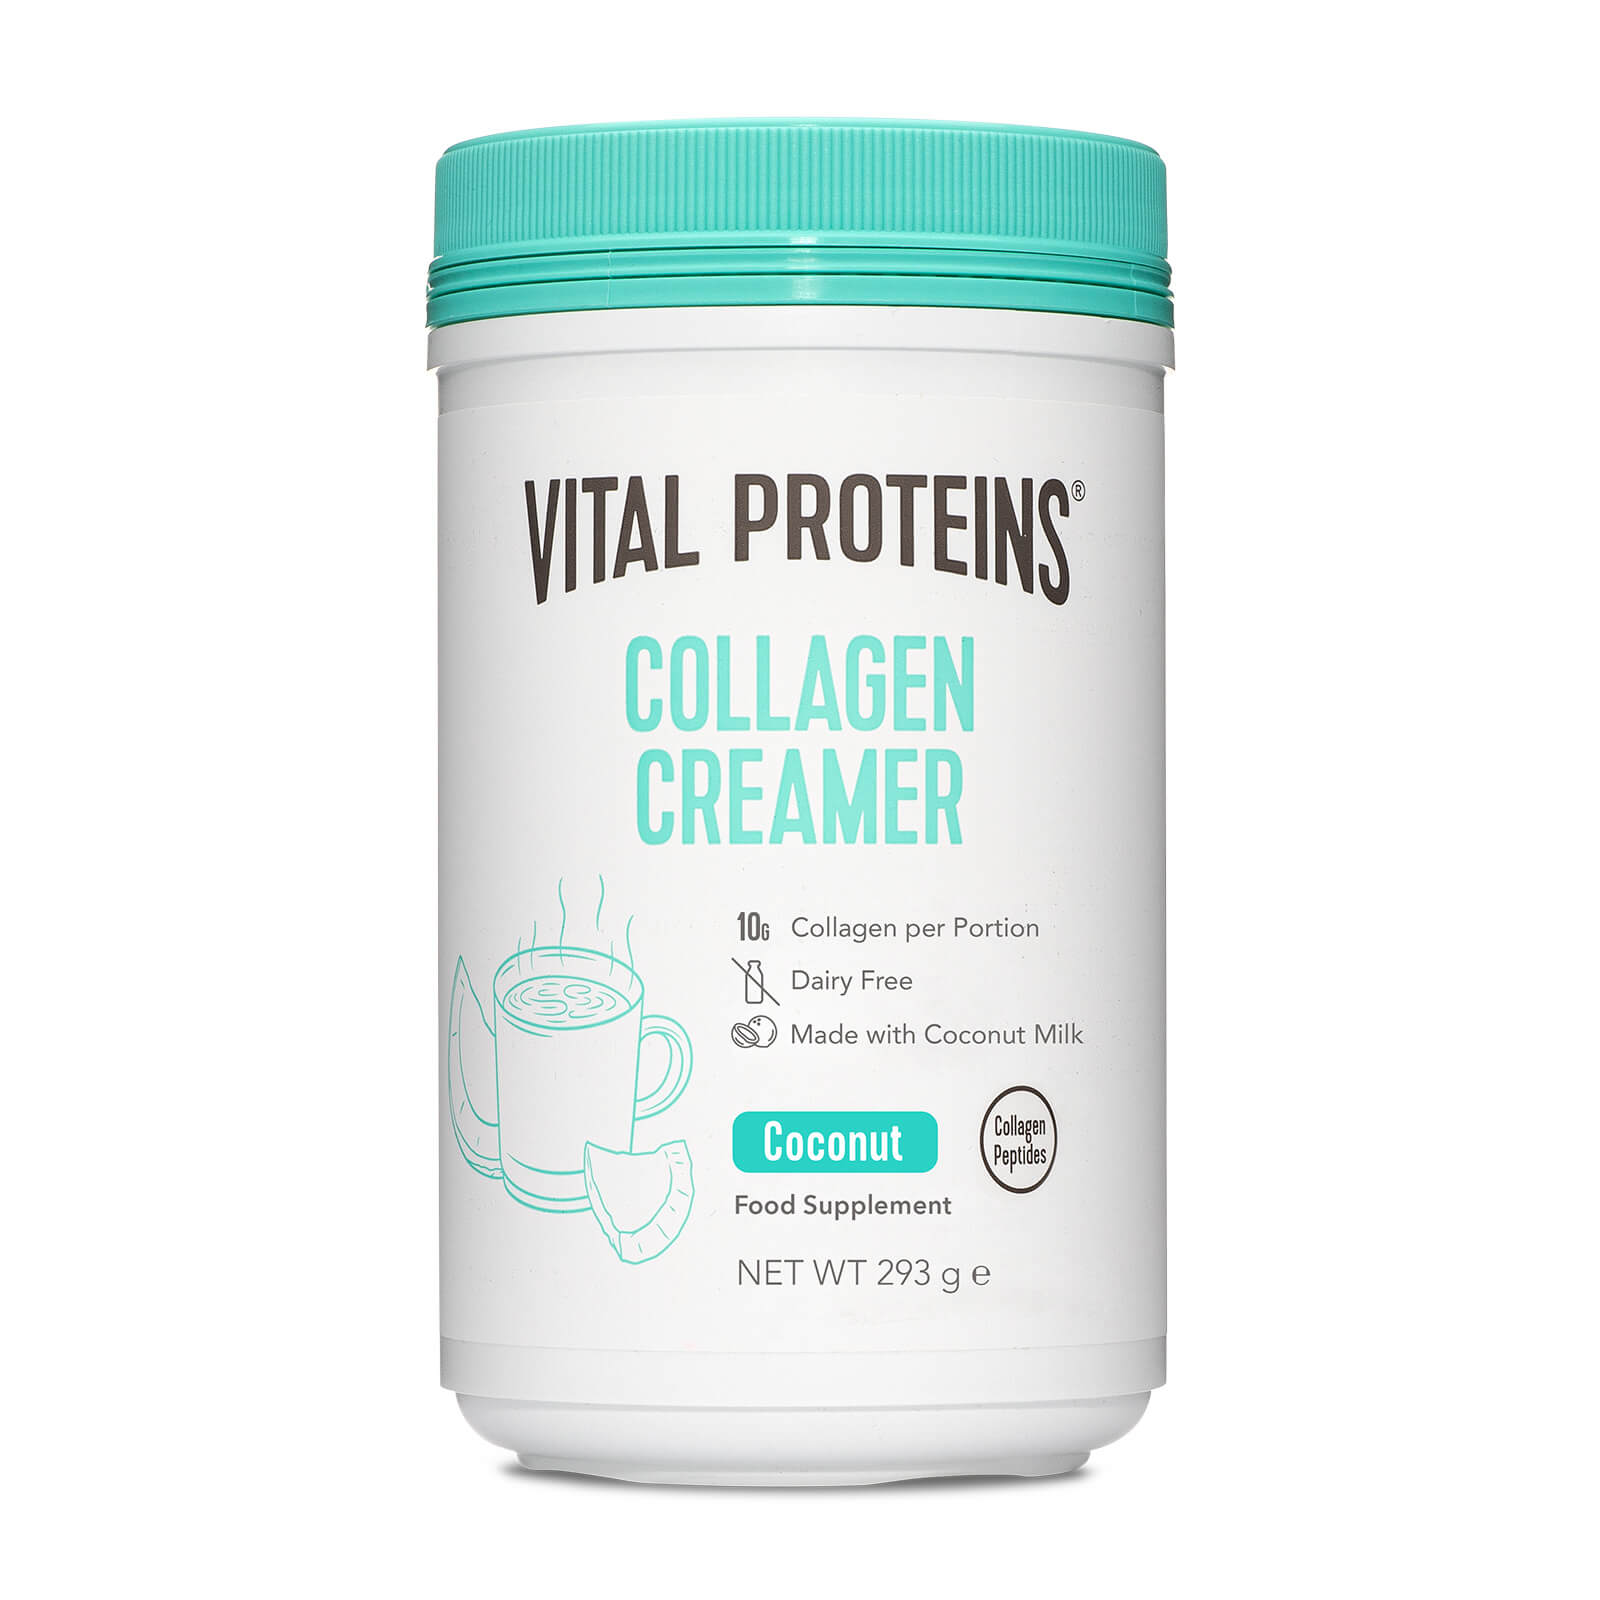 Collagen Creamer - Coconut Subscription - Delivery Every 3 Months